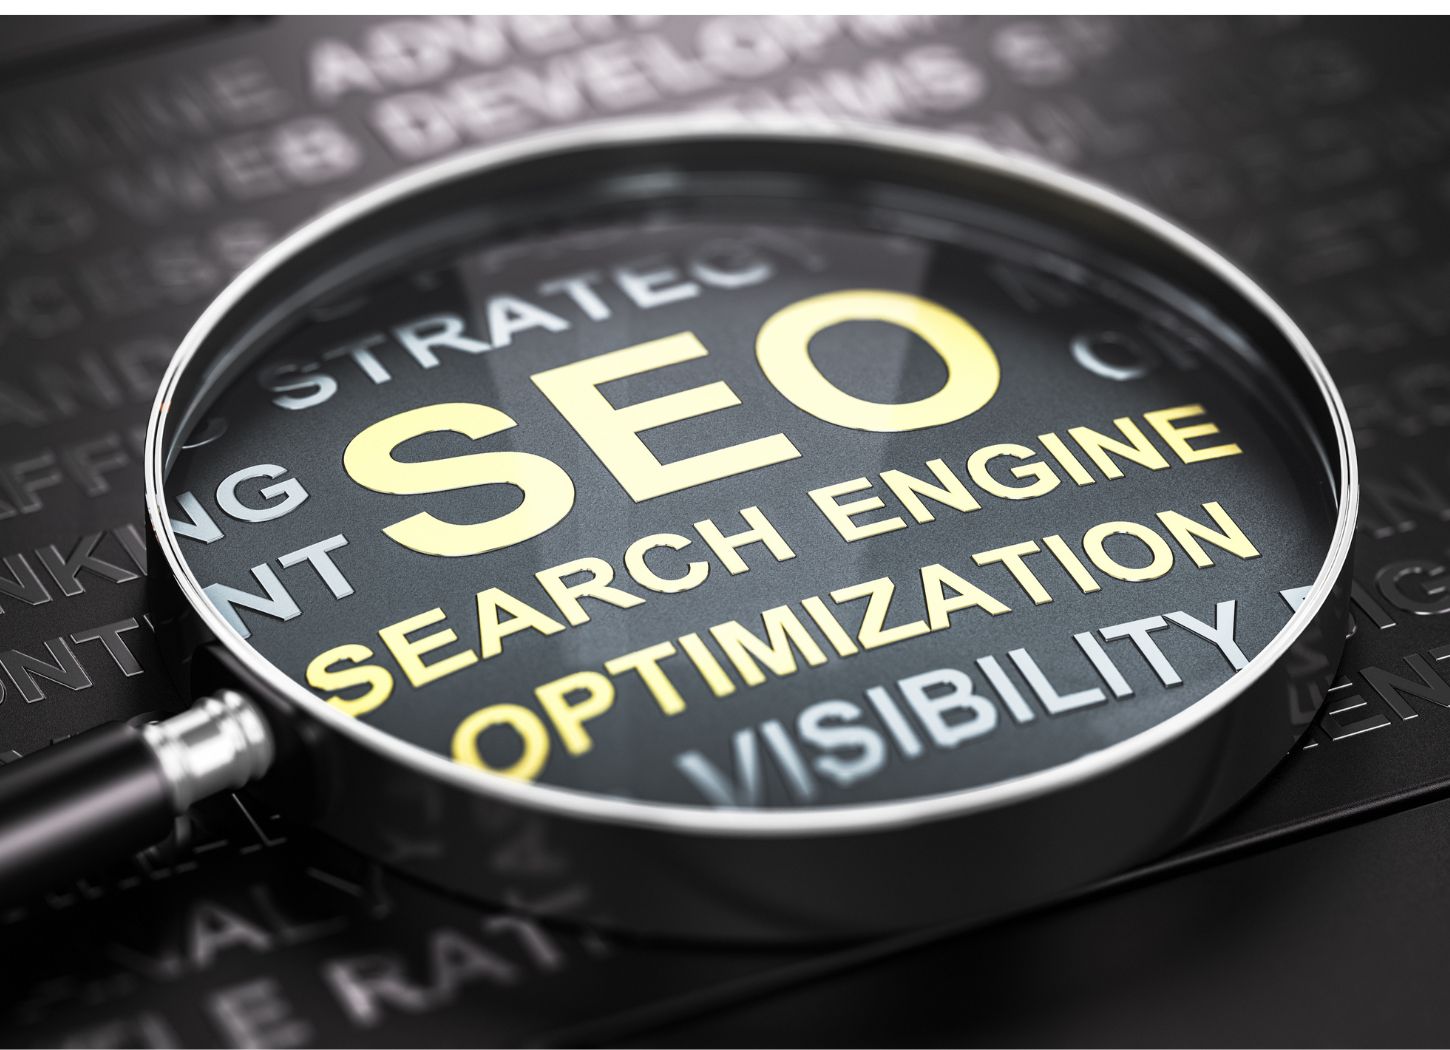 Search Engine Optimization for Detailers - SEO for detailing businesses